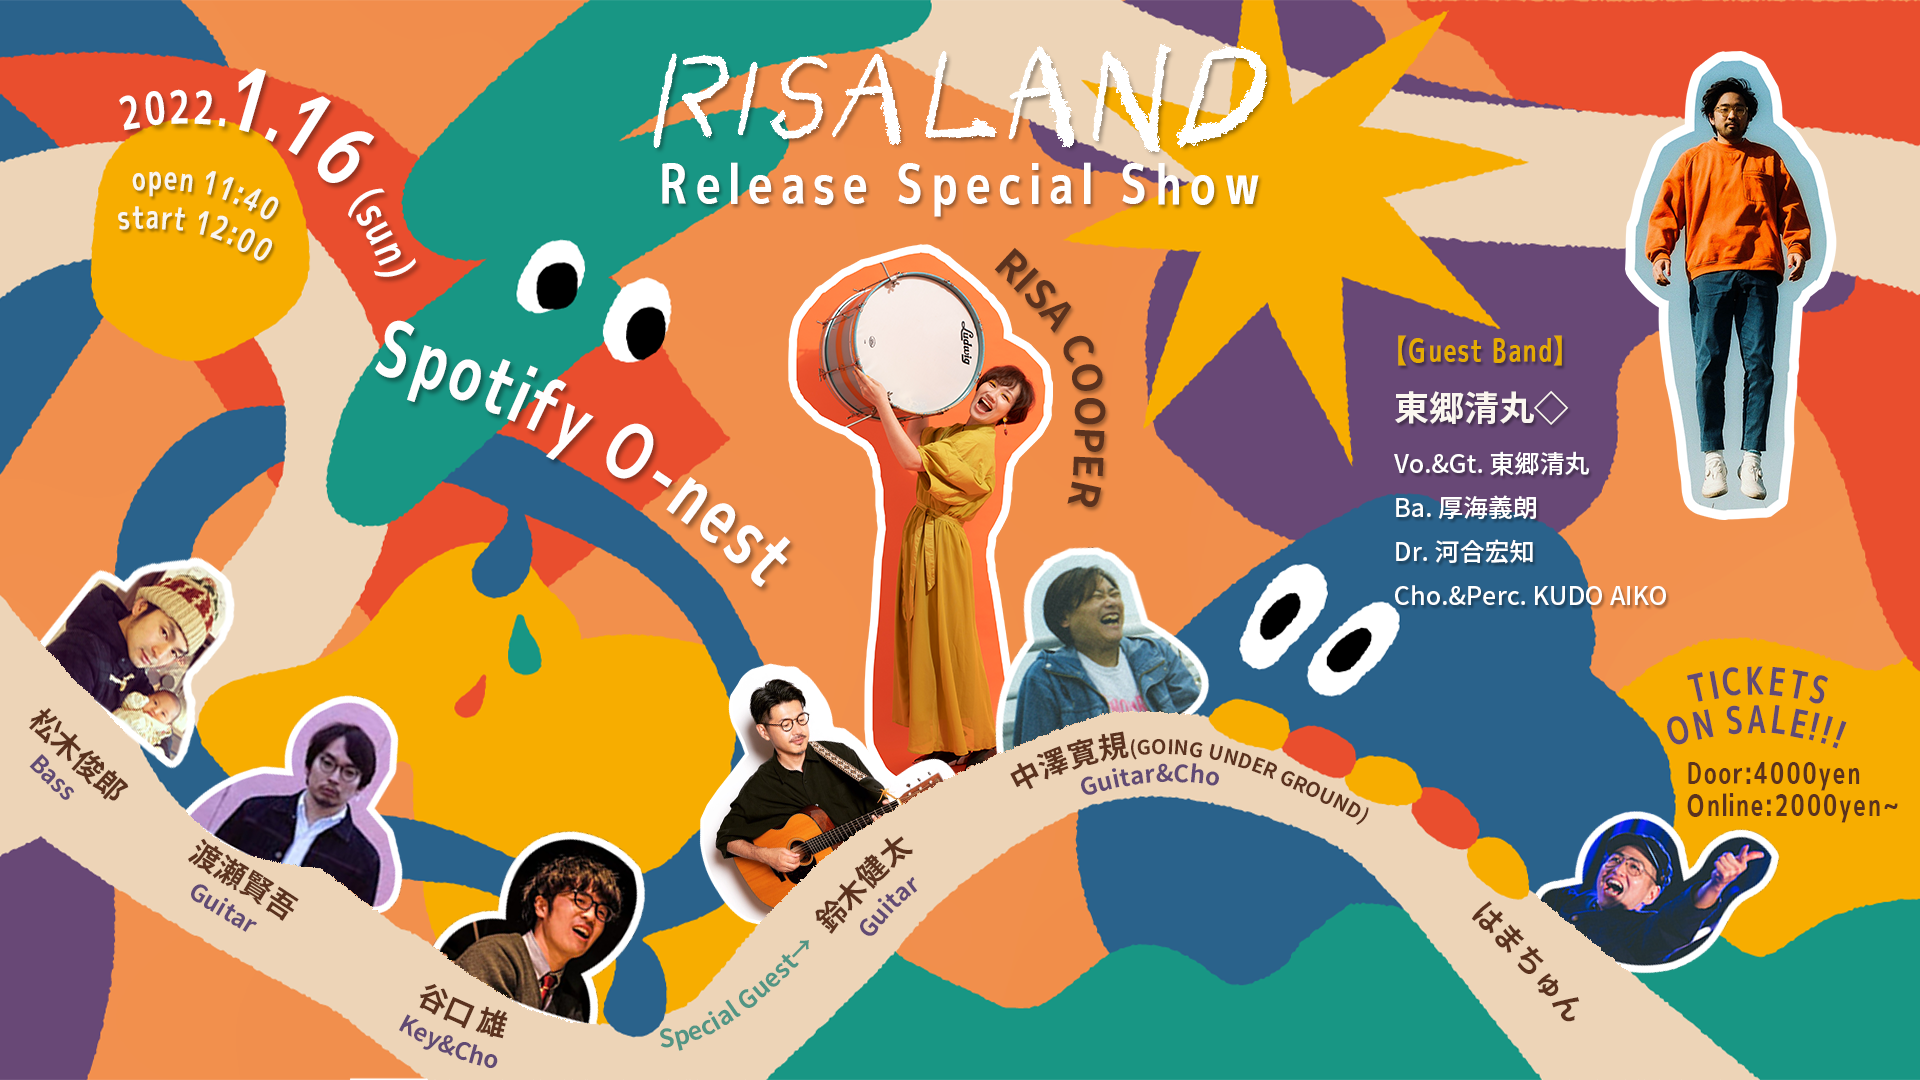 『RISA LAND』Release Special Show